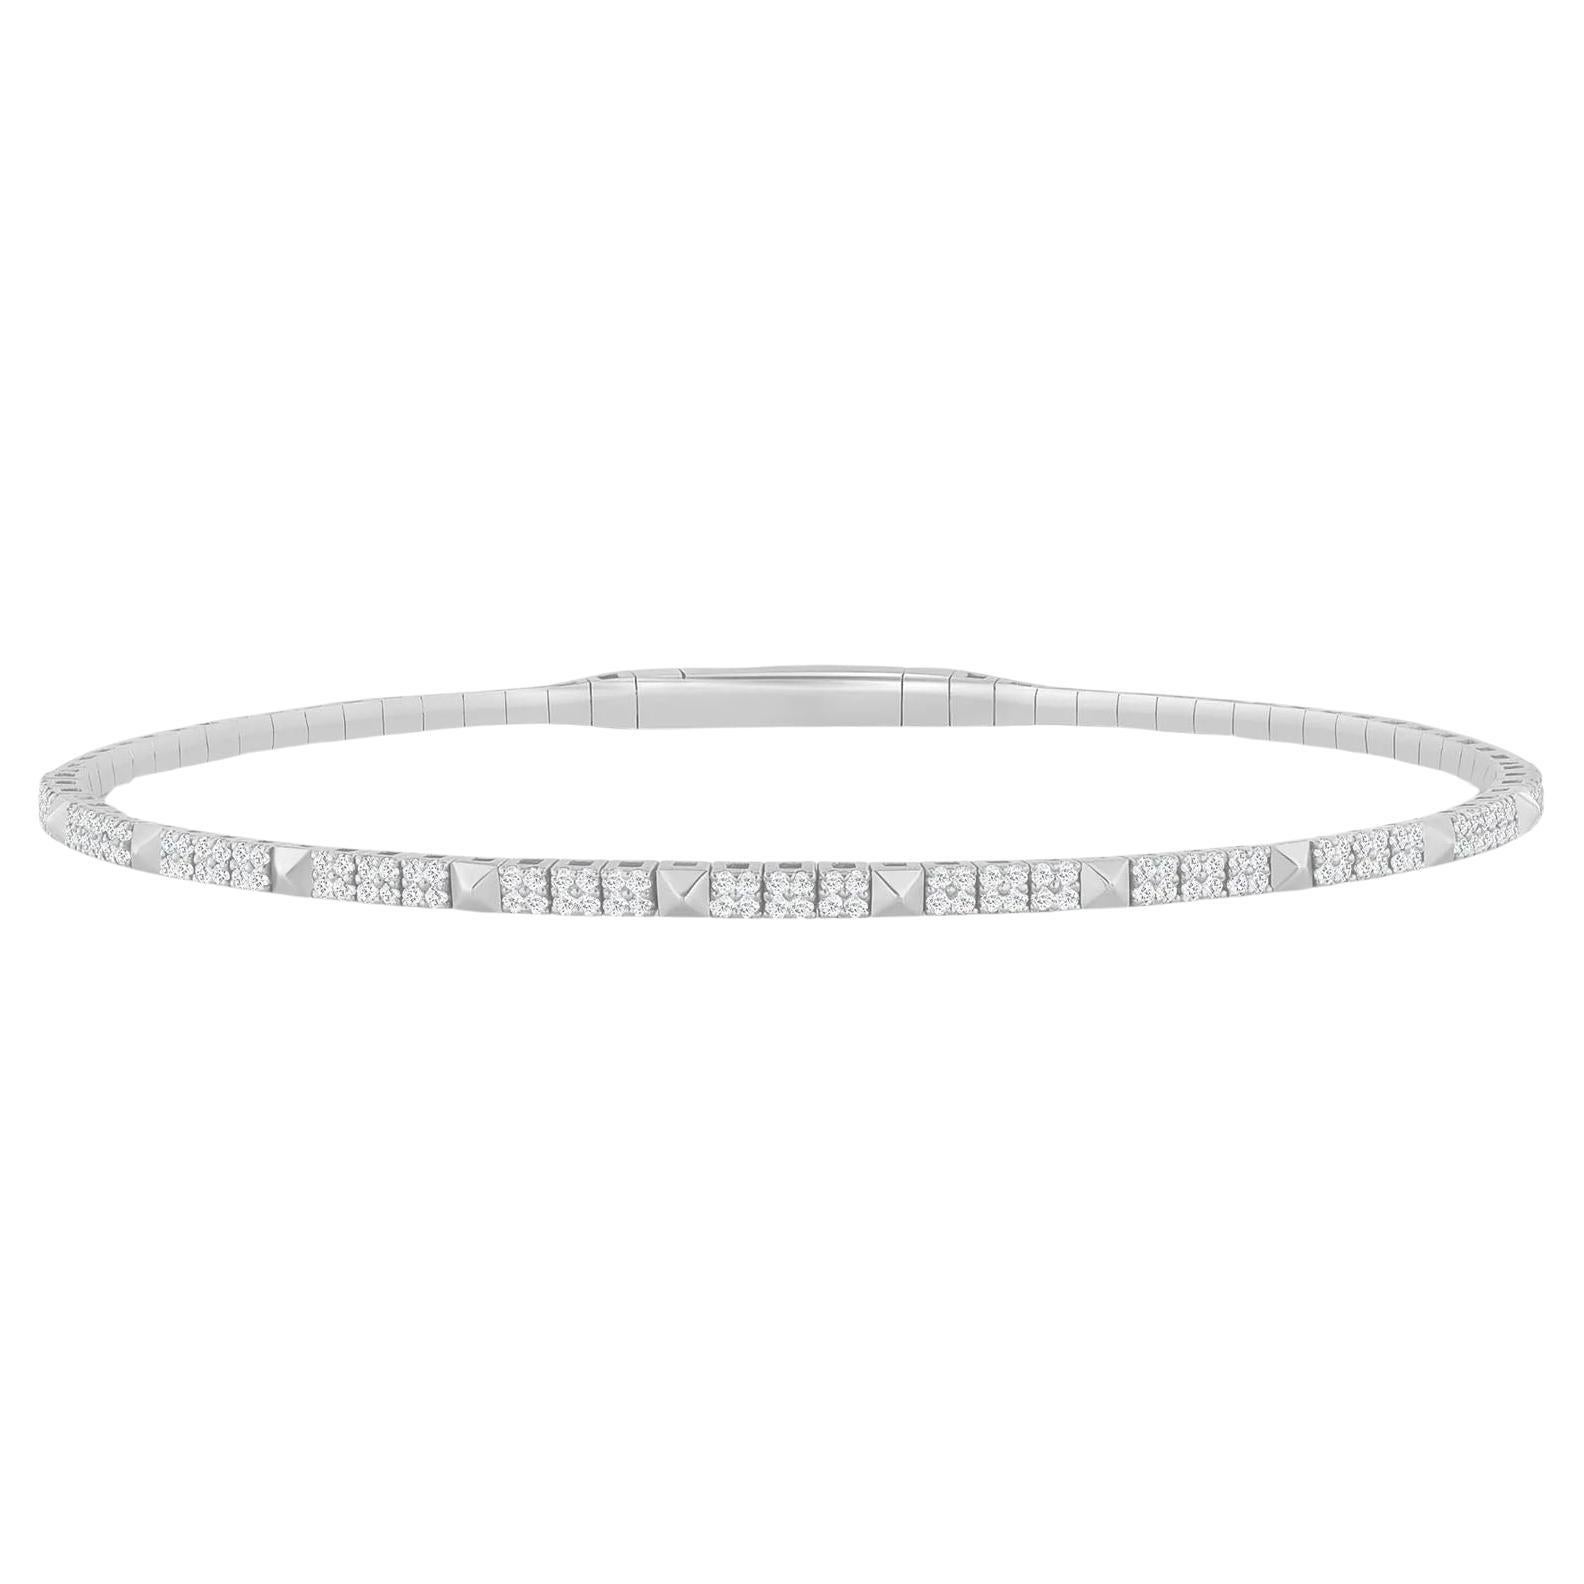 This diamond tennis bangle features beautifully cut round diamonds set gorgeously in 14k gold

Bracelet Information
Metal : 14k Gold
Diamond Cut : Round Natural Diamond
Total Diamond Carats : 0.80ct
Diamond Clarity : VS -SI
Diamond Color : F-G
Color